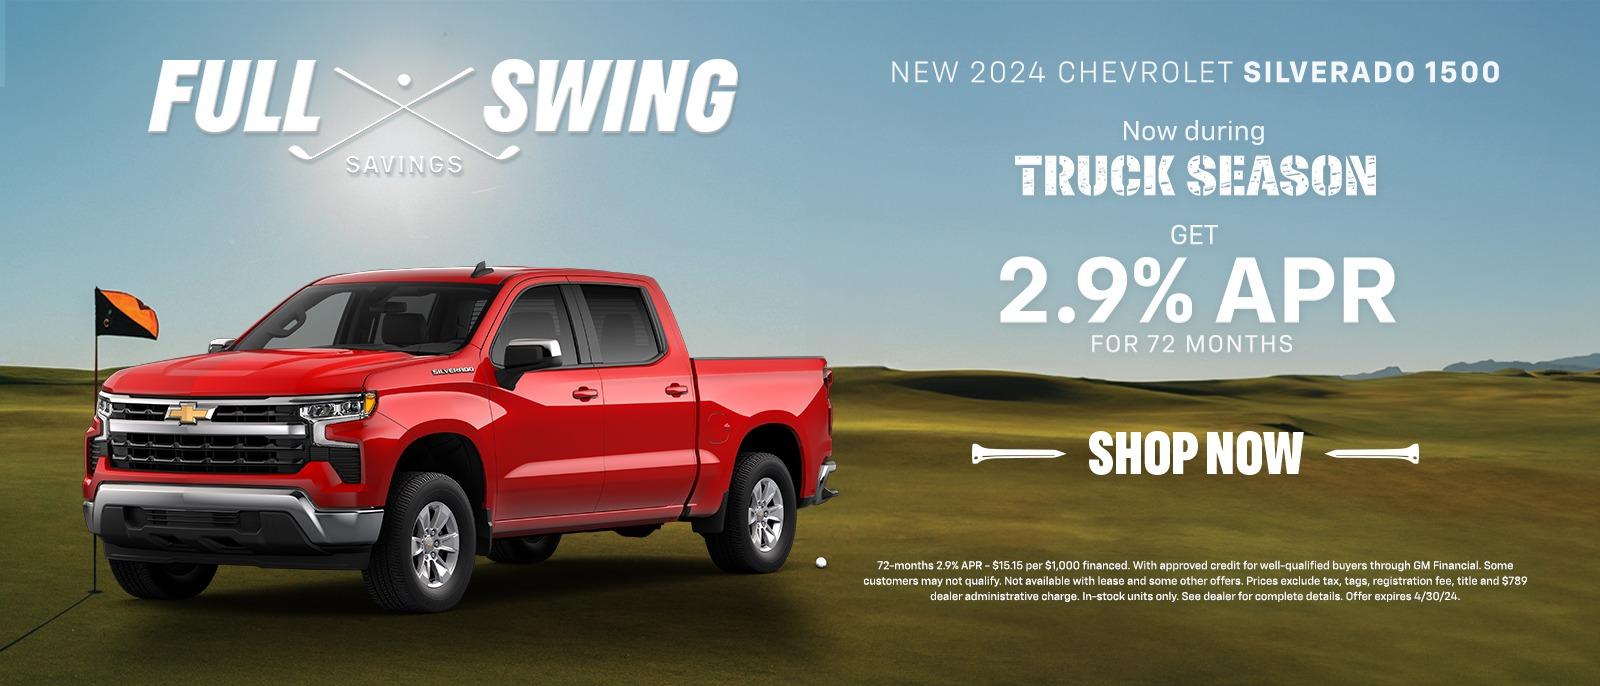 NEW 2024 CHEVROLET SILVERADO 1500 Now during TRUCK SEASON GET 2.9% APR FOR 72 MONTHS SHOP NOW